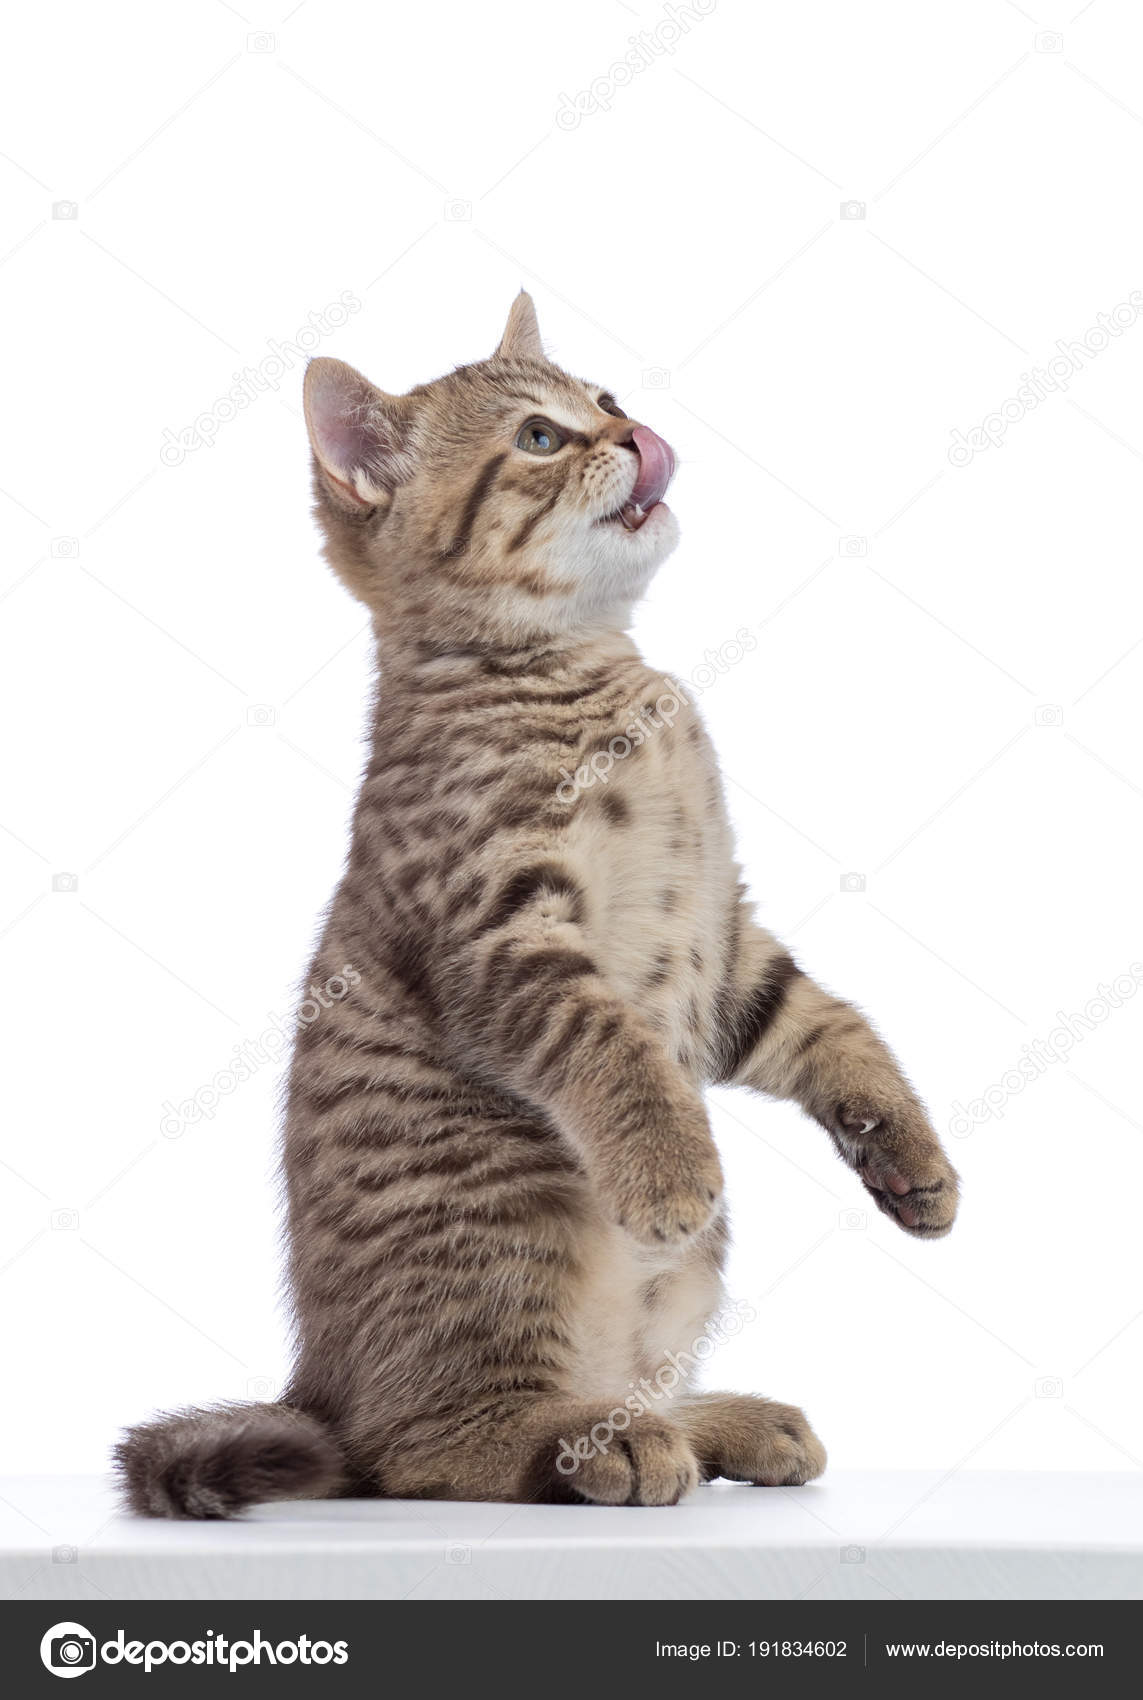  Cat standing  on its hind legs asks food  Stock Photo 